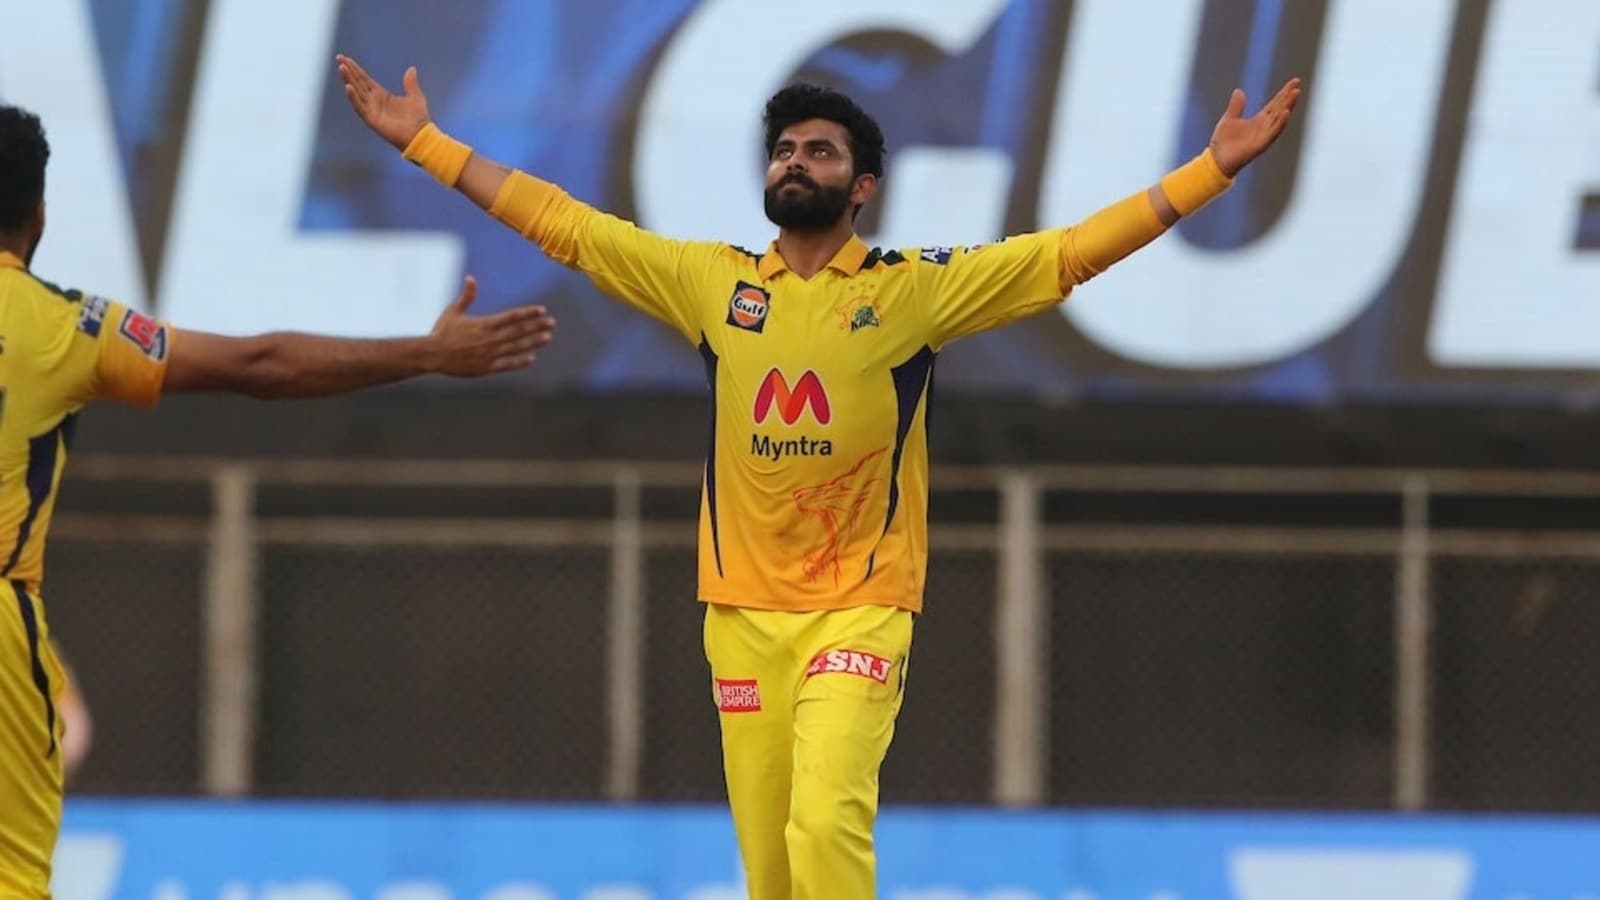 Hindi News: ‘No.8 too early for me, put me at 11’: Ravindra Jadeja’s subtle dig over his CSK batting position goes viral